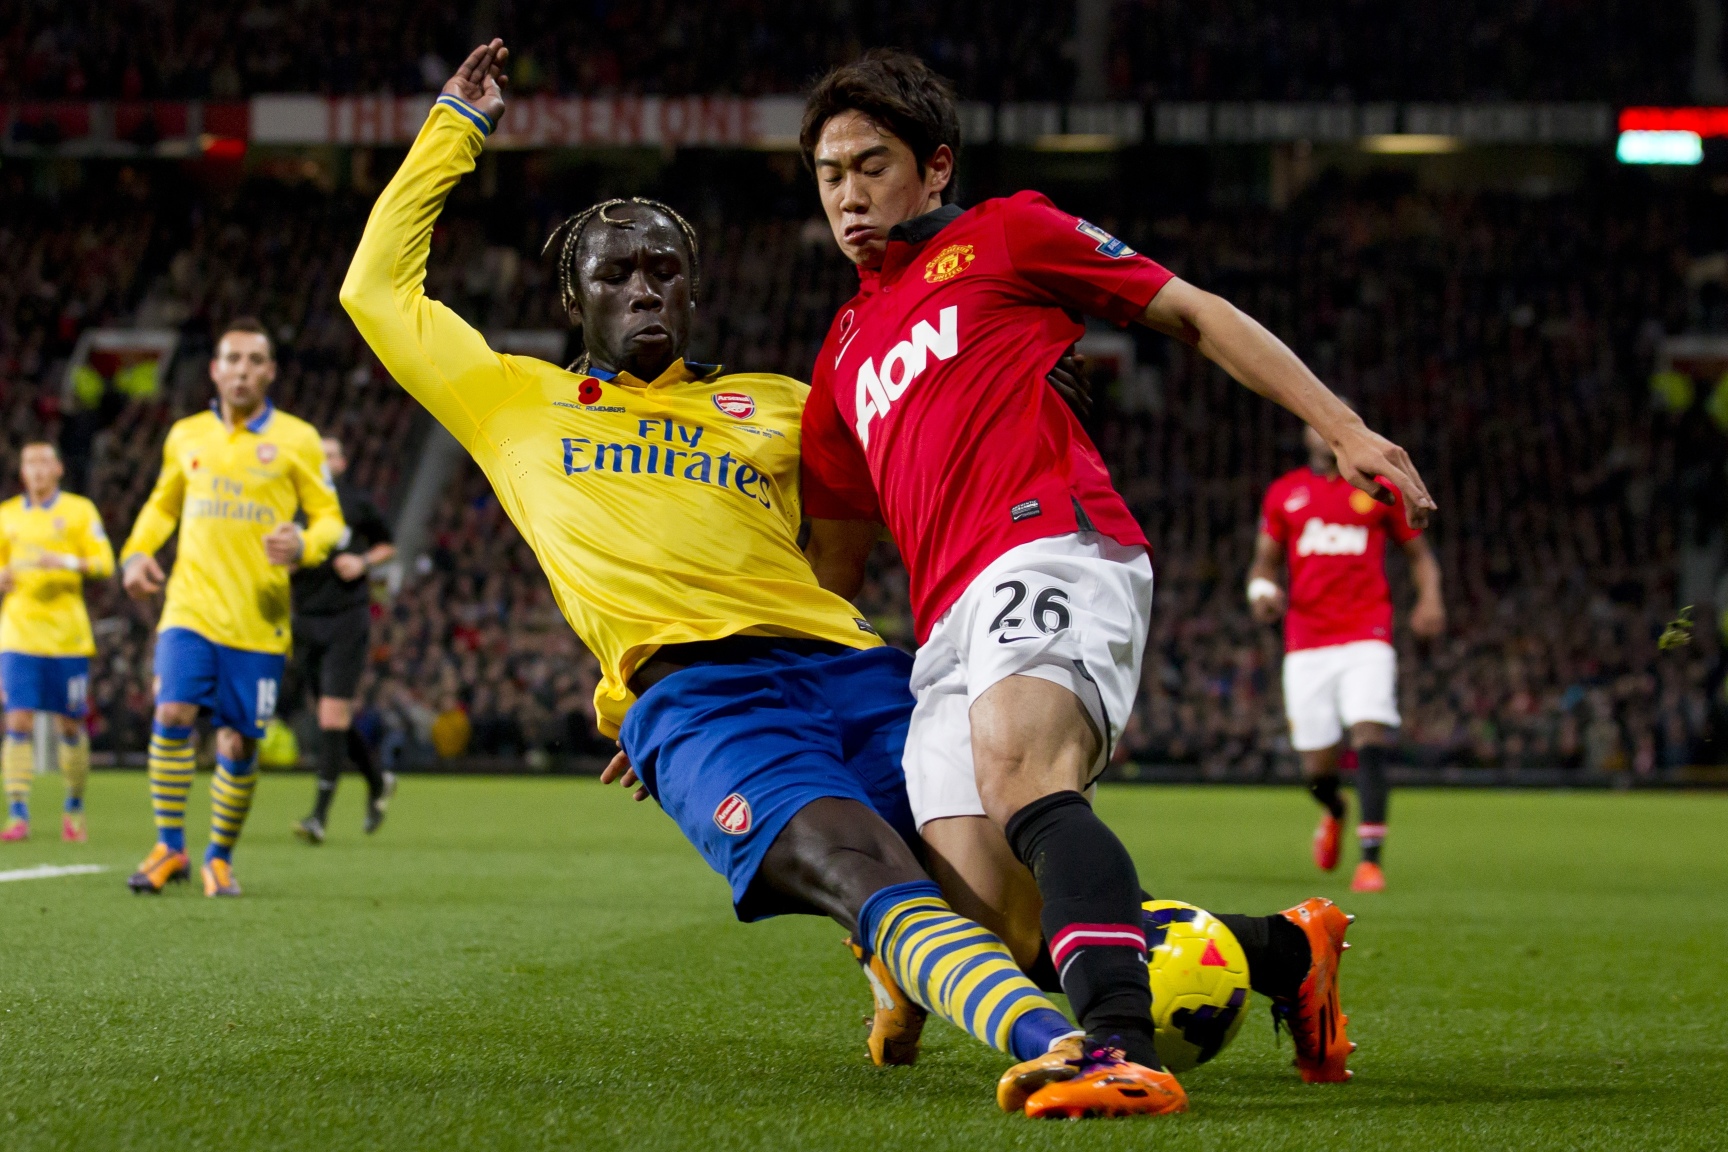 Manchester United's Shinji Kagawa fights for the ball against Arsenal's Bacary Sagna during their match at Old Trafford Stadium in Manchester. Photo: AP